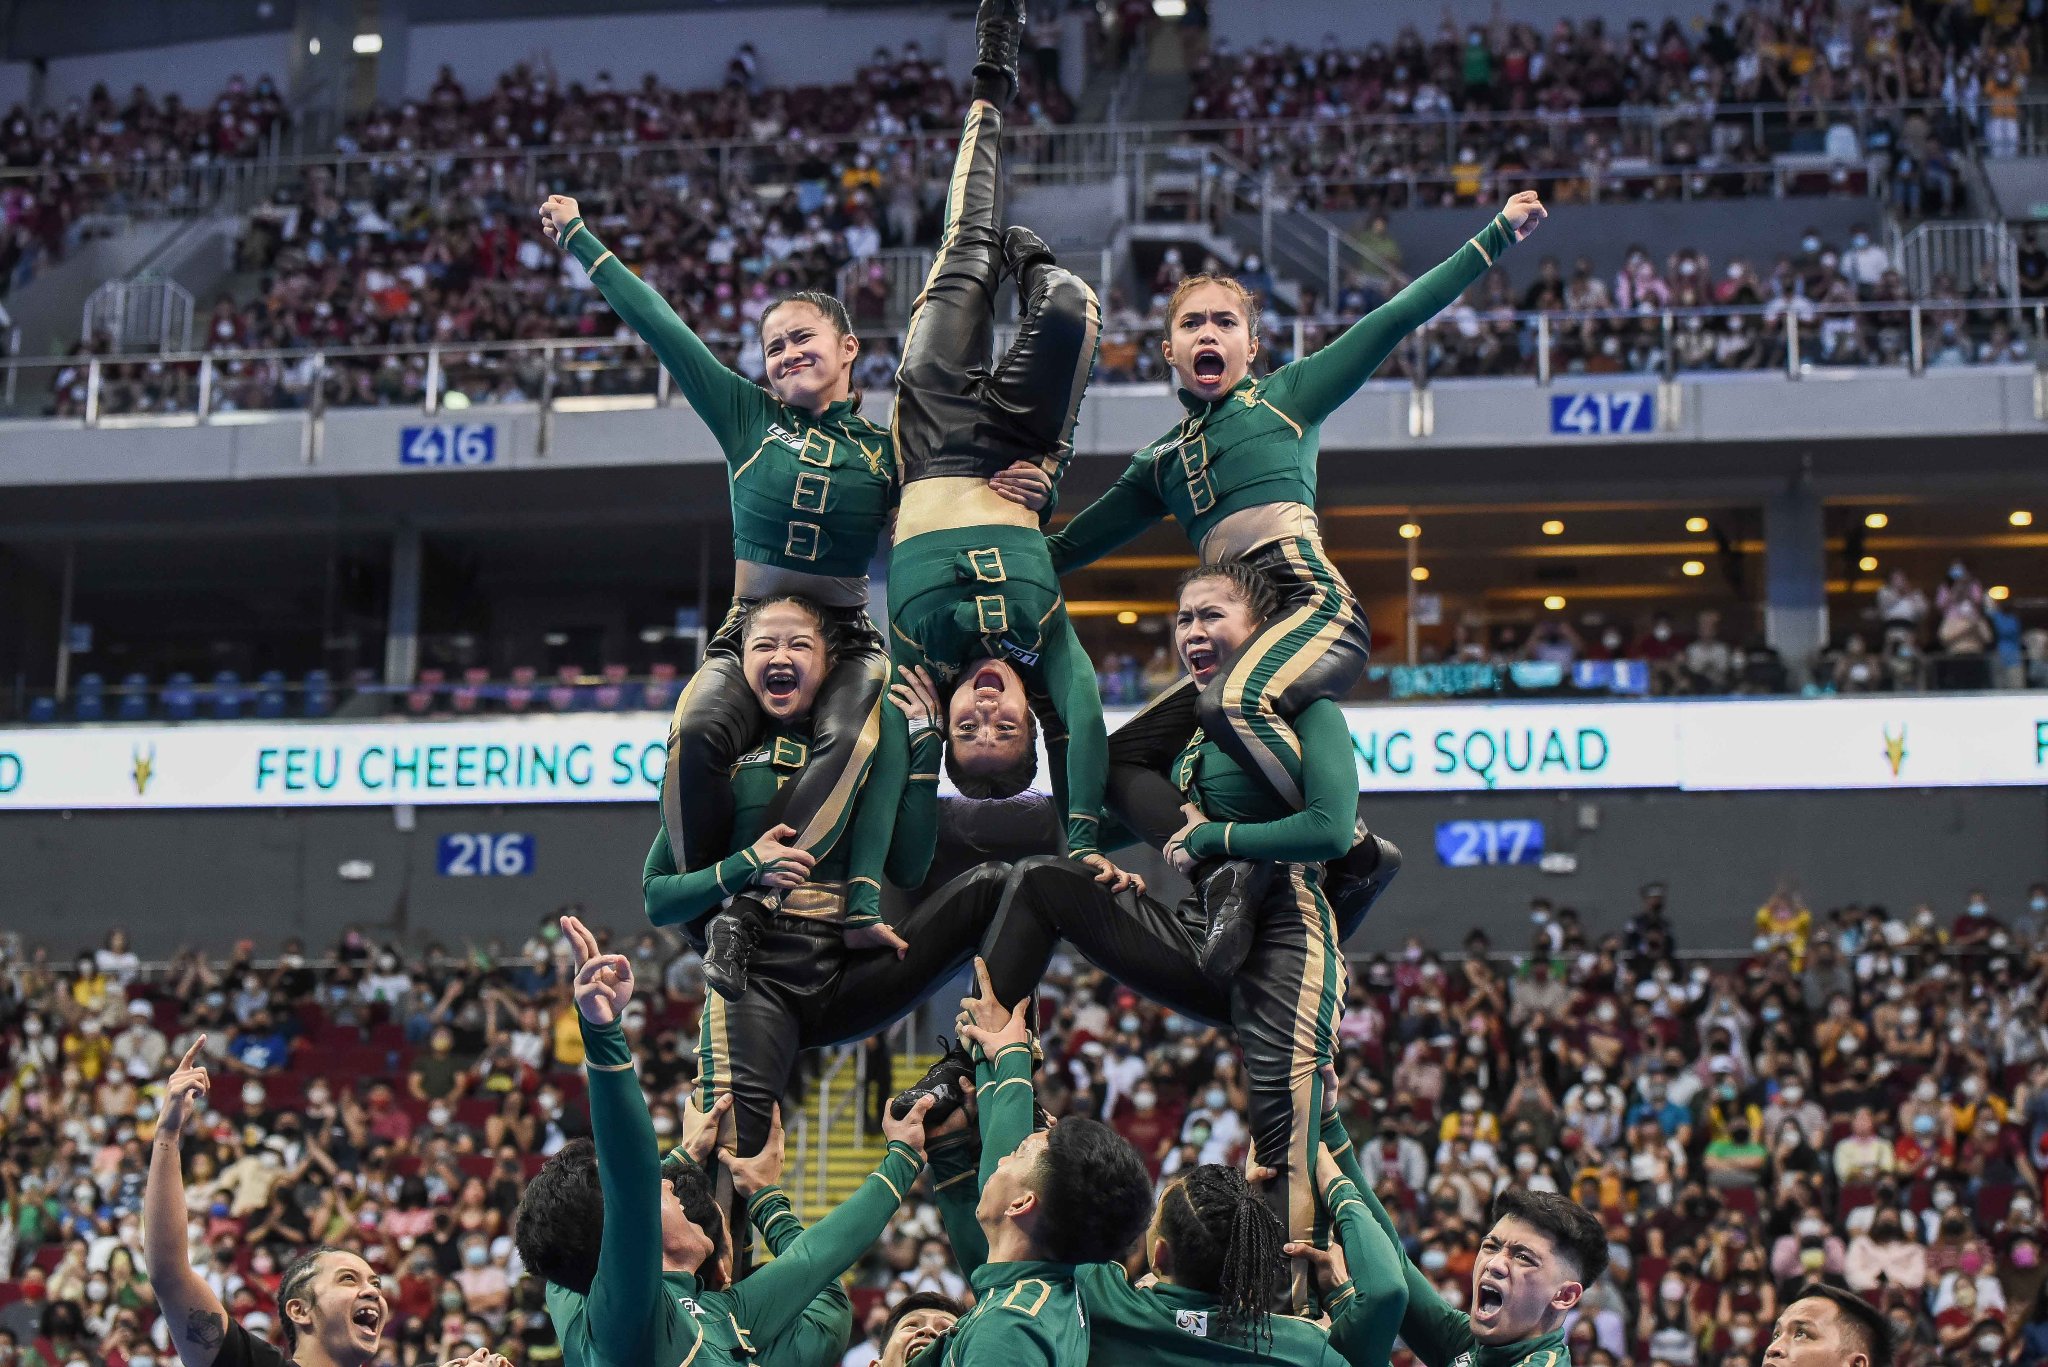 FEU Cheering Squad Wins UAAP Cheerdance Competition 2022 When In Manila